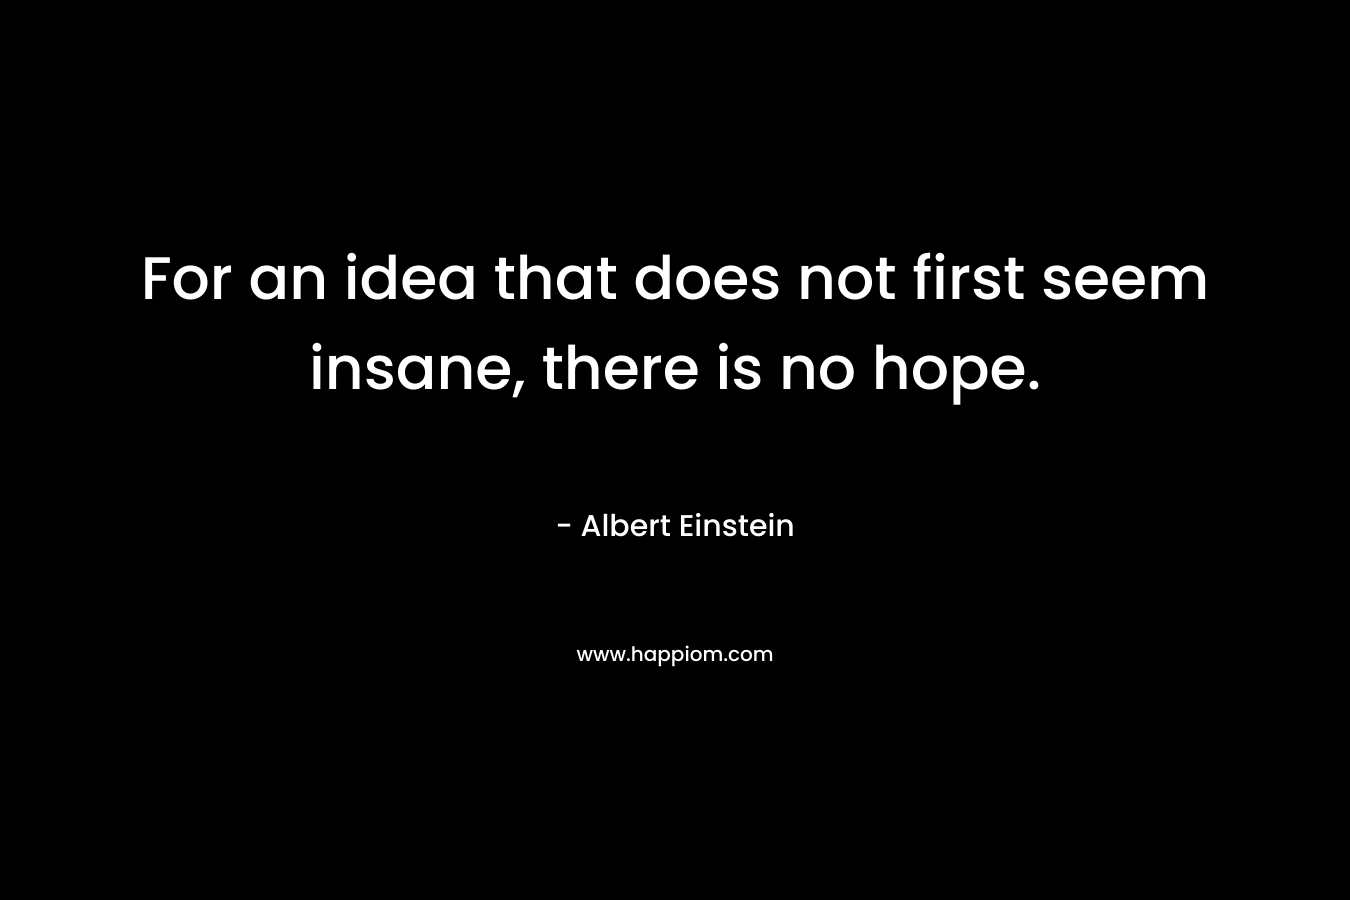 For an idea that does not first seem insane, there is no hope. – Albert Einstein